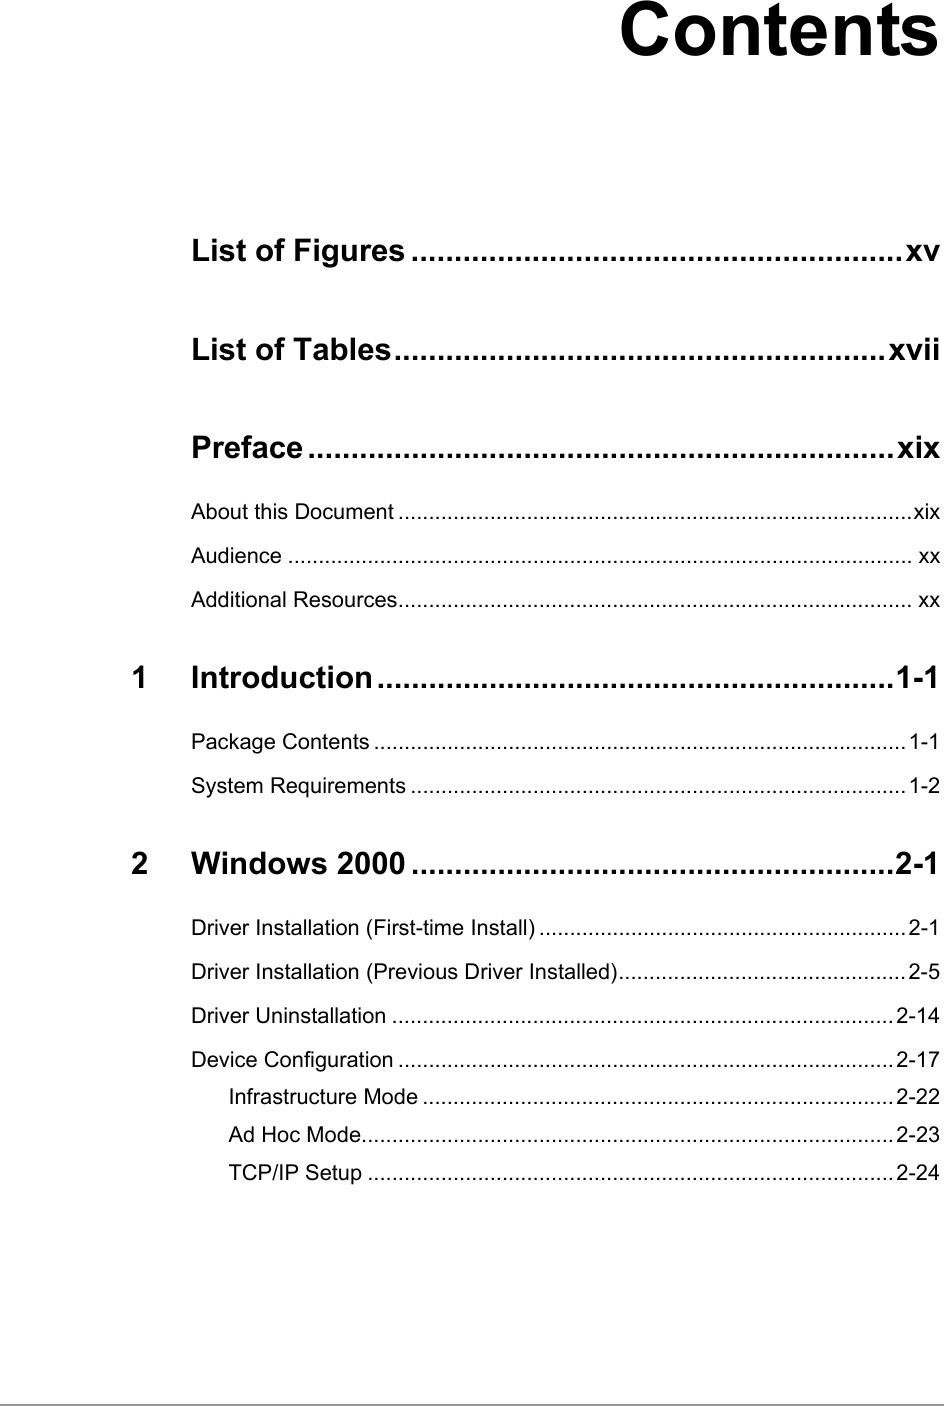   Contents List of Figures .........................................................xv List of Tables.........................................................xvii Preface ....................................................................xix About this Document ....................................................................................xix Audience ...................................................................................................... xx Additional Resources.................................................................................... xx 1 Introduction............................................................1-1 Package Contents .......................................................................................1-1 System Requirements .................................................................................1-2 2 Windows 2000 ........................................................2-1 Driver Installation (First-time Install) ............................................................2-1 Driver Installation (Previous Driver Installed)...............................................2-5 Driver Uninstallation ..................................................................................2-14 Device Configuration .................................................................................2-17 Infrastructure Mode .............................................................................2-22 Ad Hoc Mode.......................................................................................2-23 TCP/IP Setup ......................................................................................2-24 